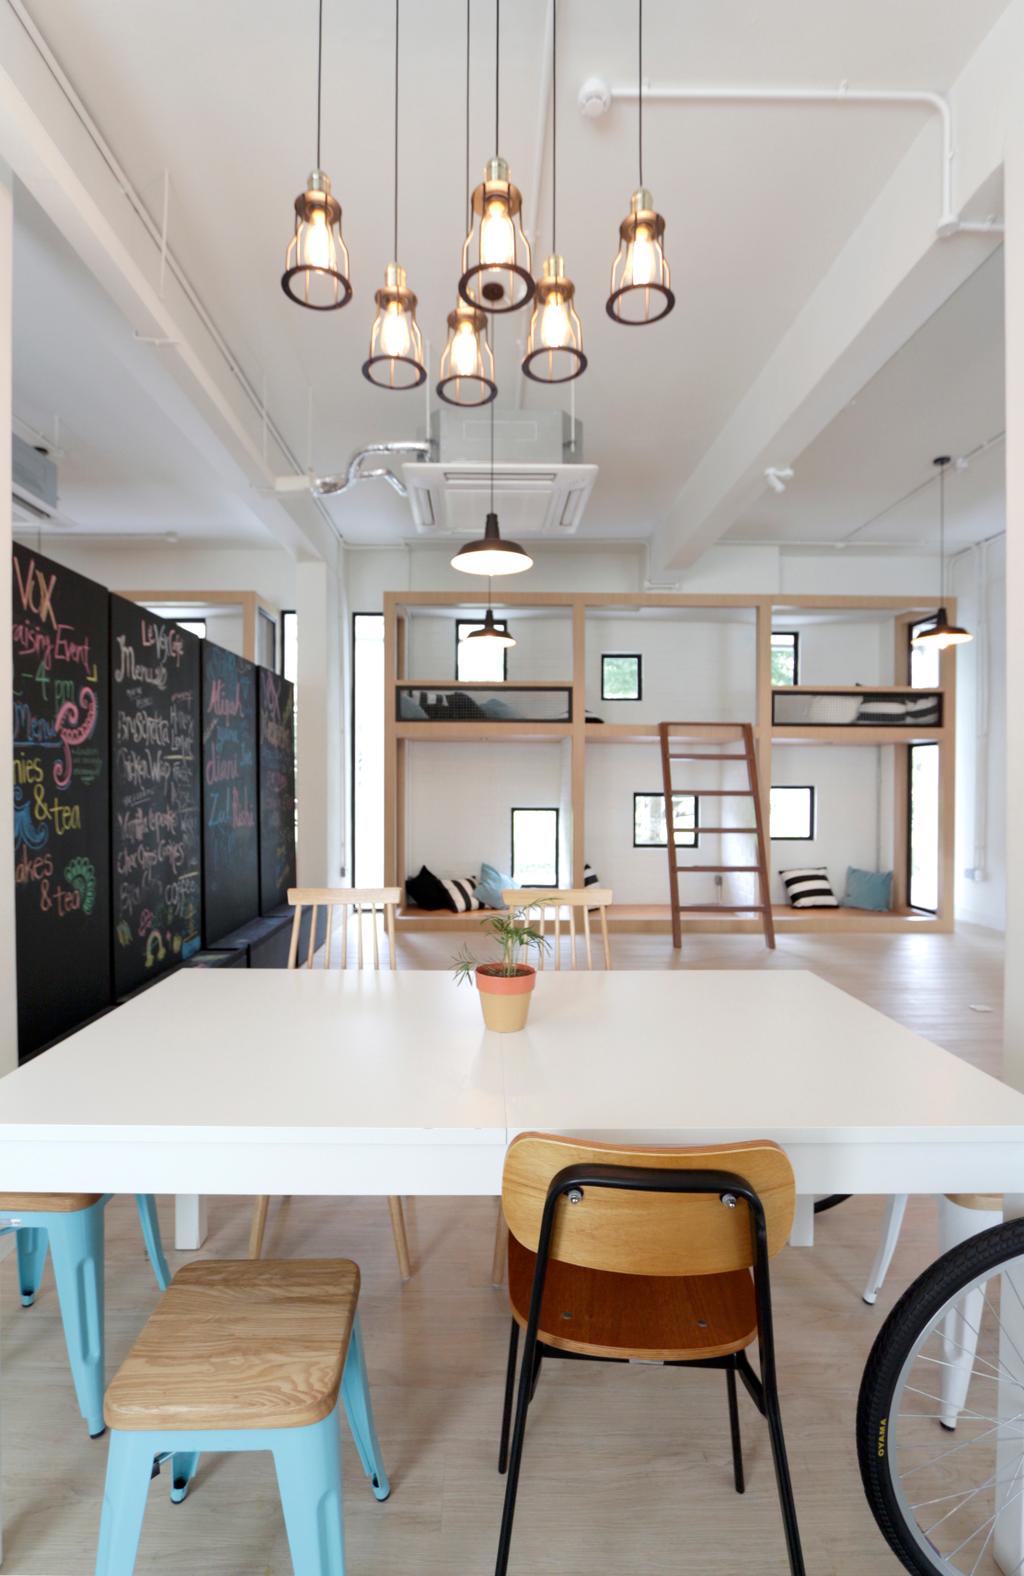 VOX Youth Centre, Commercial, Architect, EHKA Studio, Minimalist, Dining Room, Dining Table, White Table, Pendant Lamp, Hanging Lamp, High Ceiling, Blackboard, Indoors, Interior Design, Room, Flora, Jar, Plant, Potted Plant, Pottery, Vase